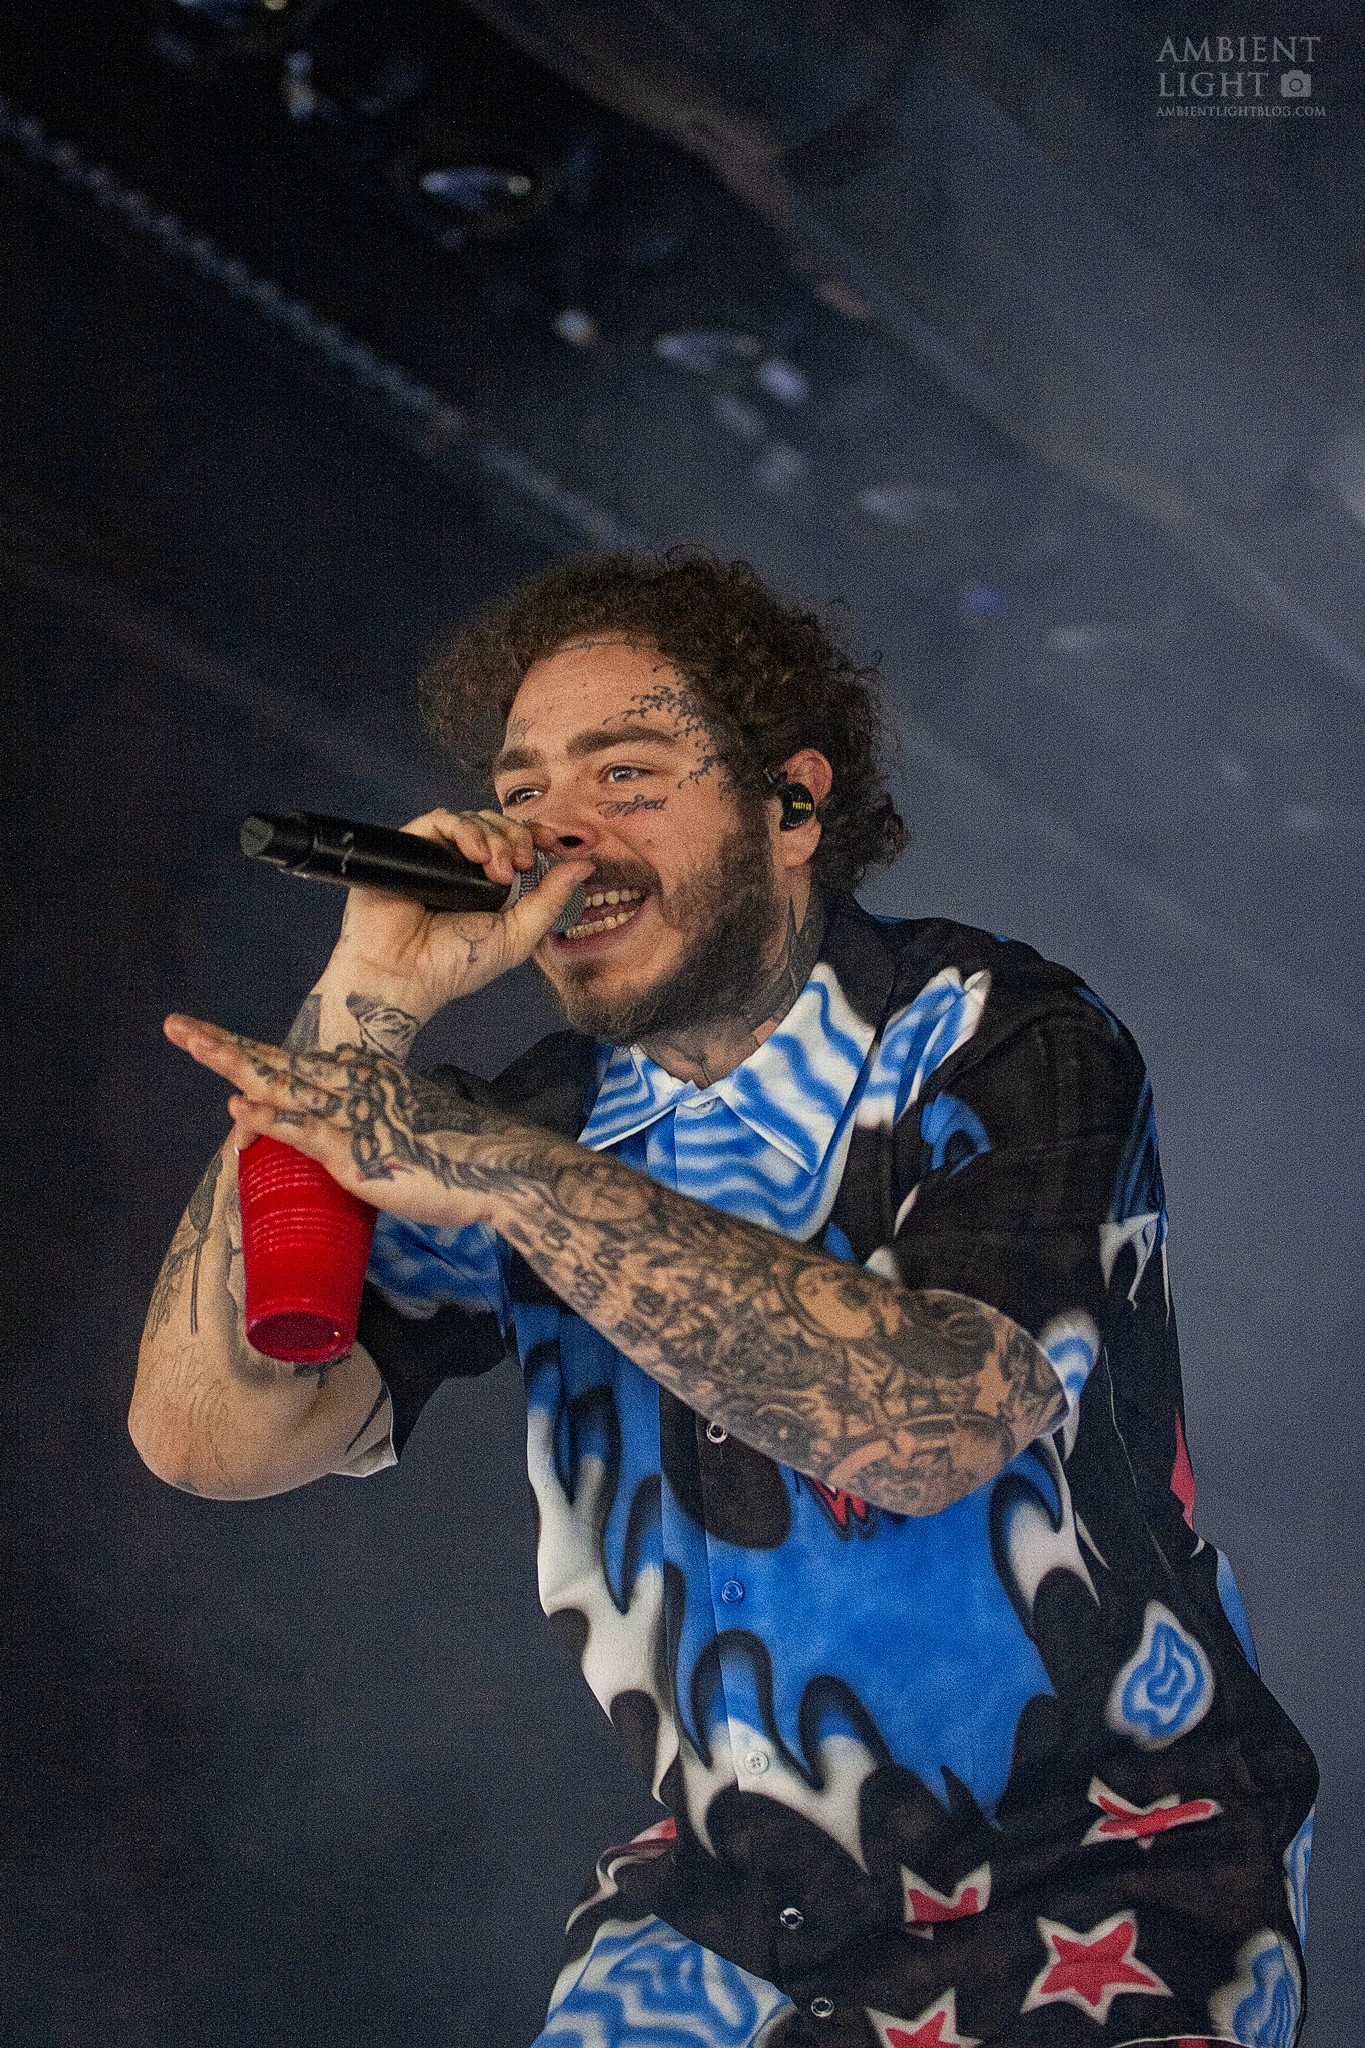 Concert Review Post Malone, Auckland New Zealand, 2019